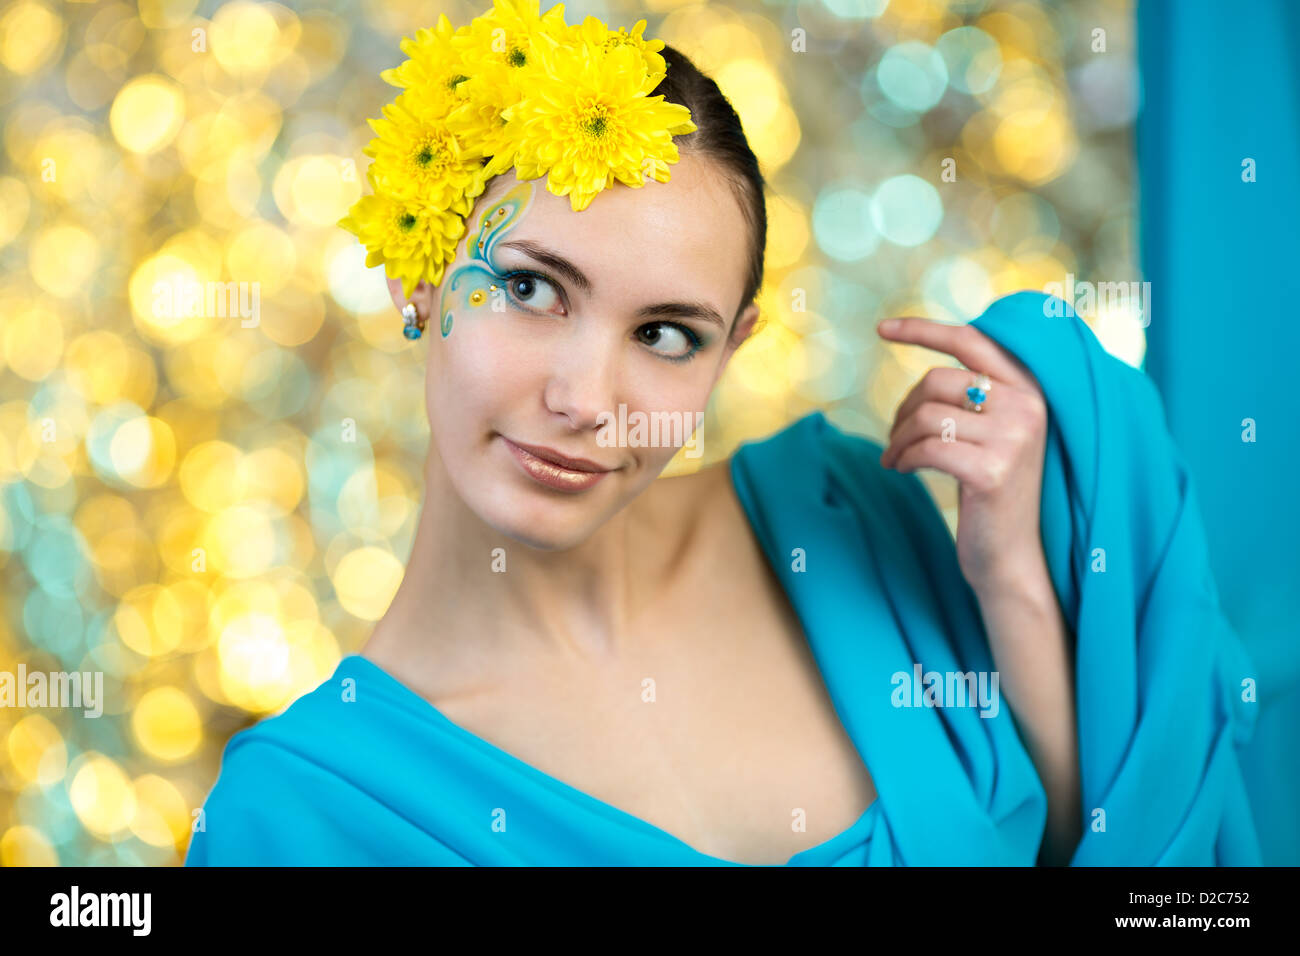 Young model with makeup and flowers in her hair Stock Photo